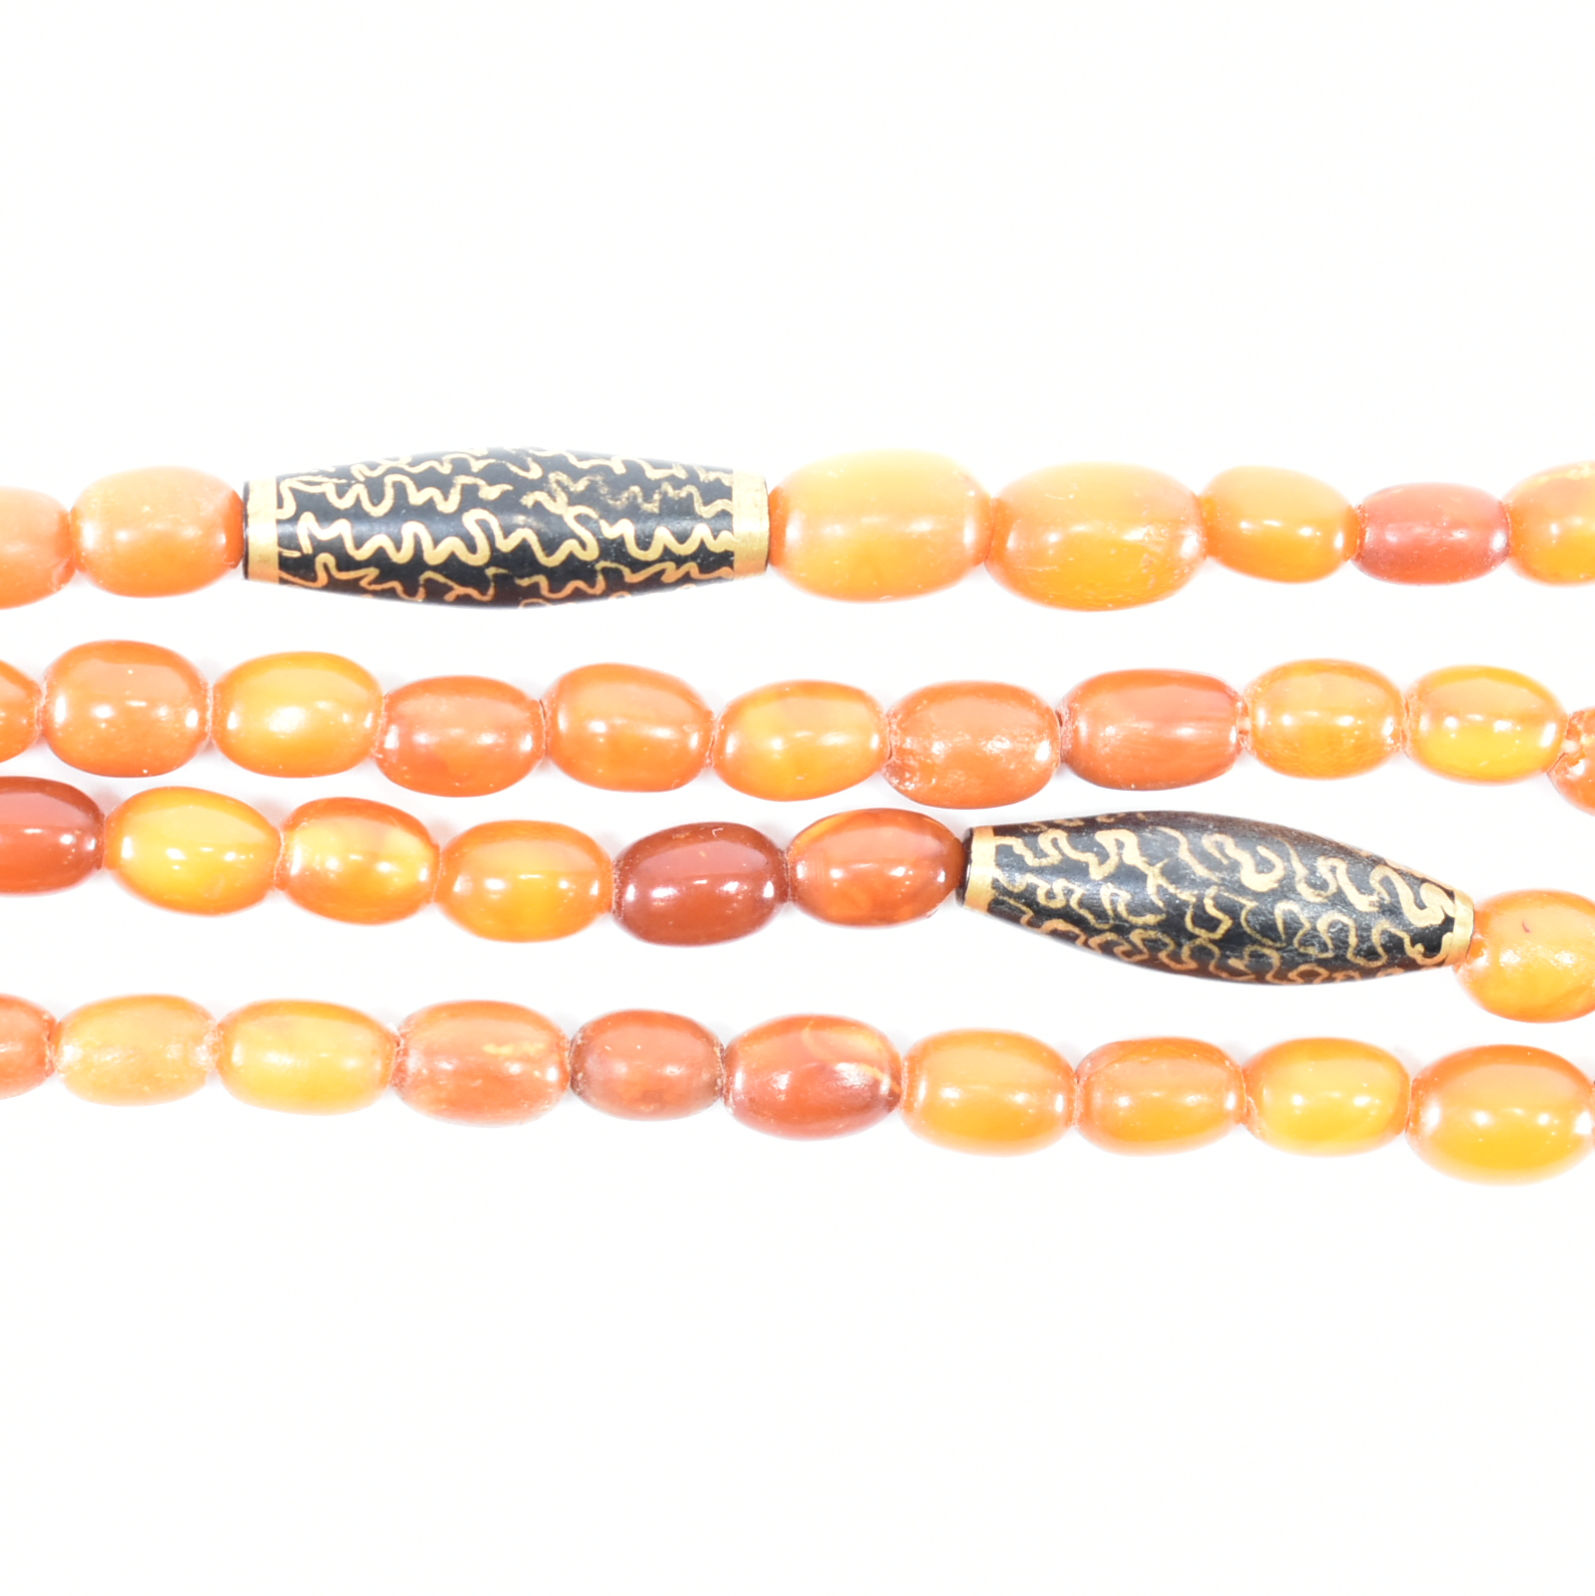 1930S AMBER BEAD NECKLACE - Image 2 of 2